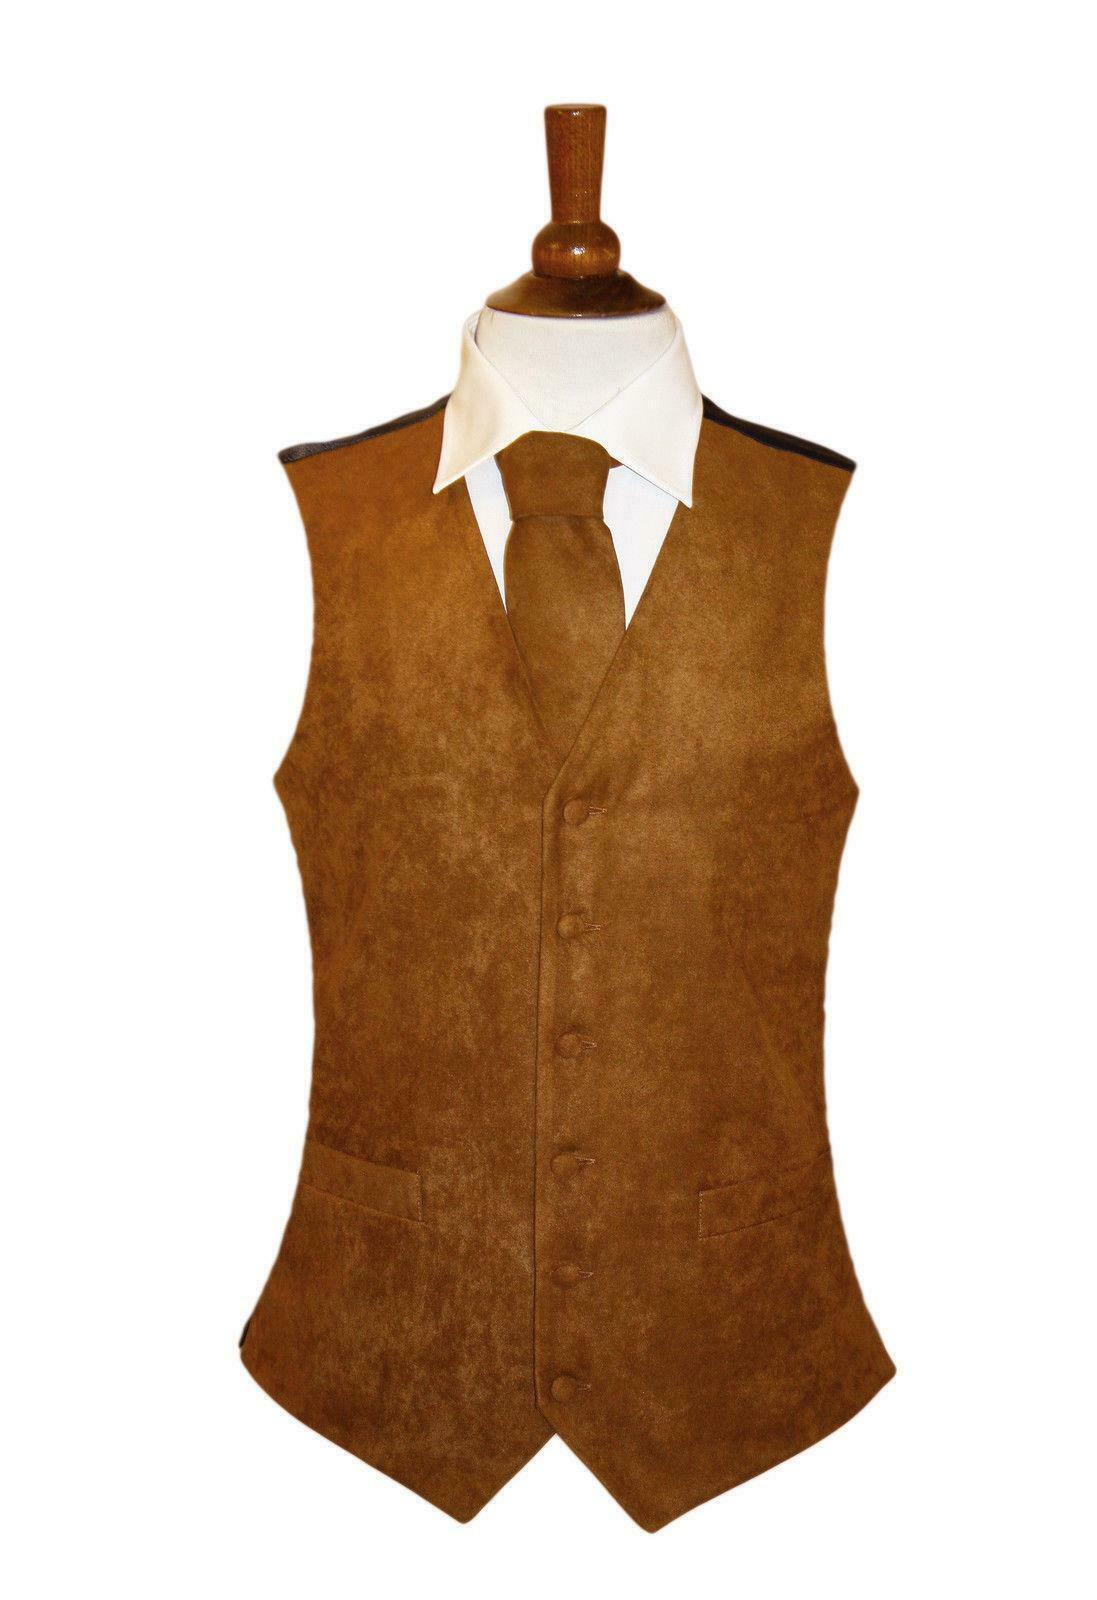 Suede Effect Waistcoat with Optional Matching Tie - Biege